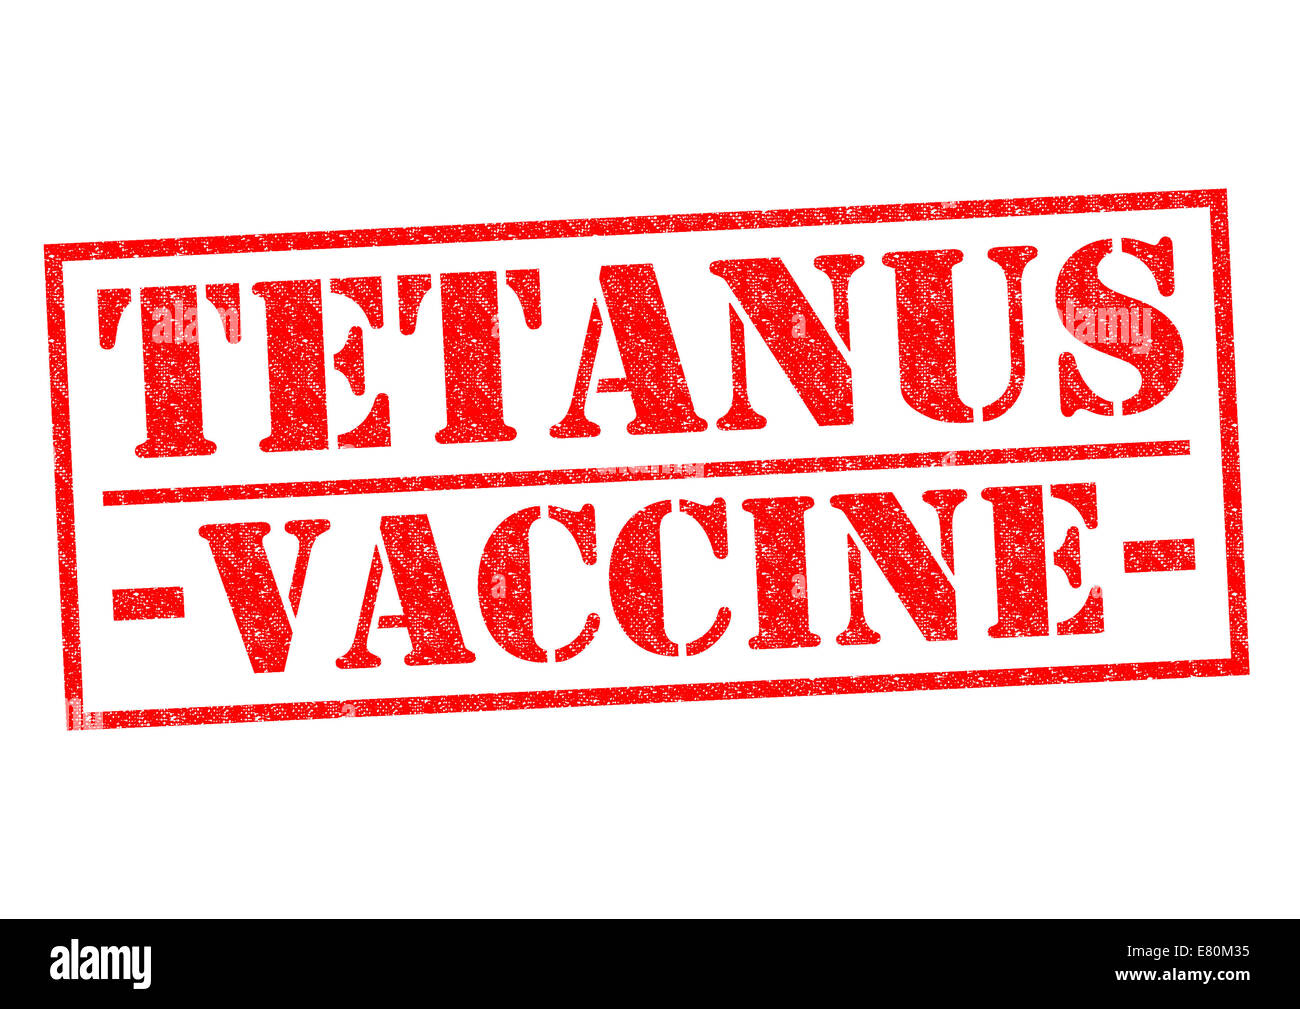 TETANUS VACCINE red Rubber Stamp over a white background. Stock Photo